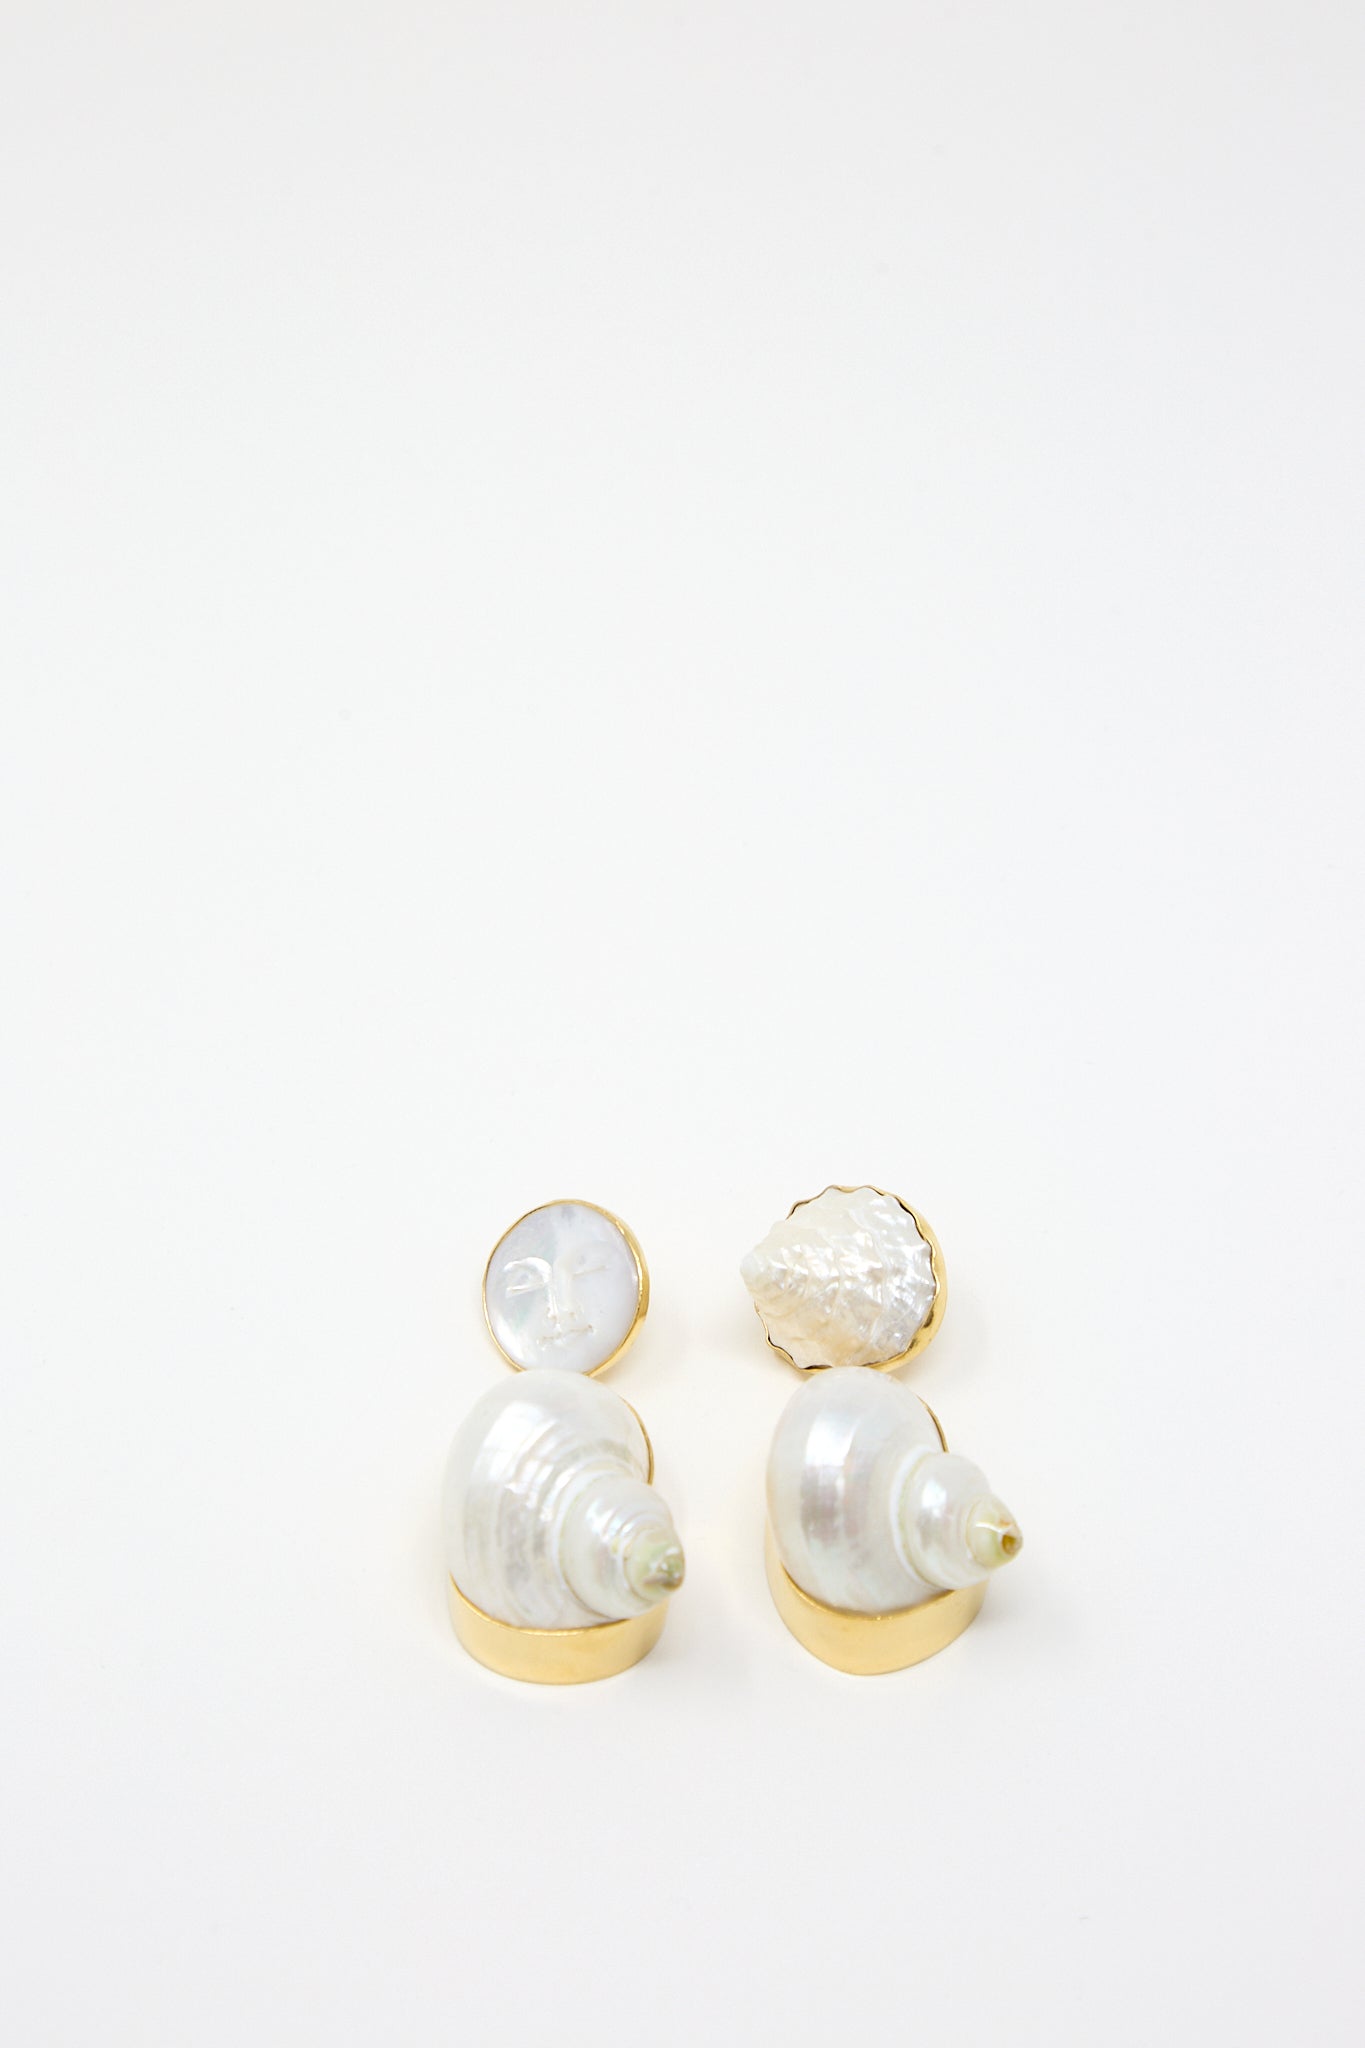 A pair of Grainne Morton Moon and Star Shell Drop Earrings with a shell and Mother of Pearl on a white surface.